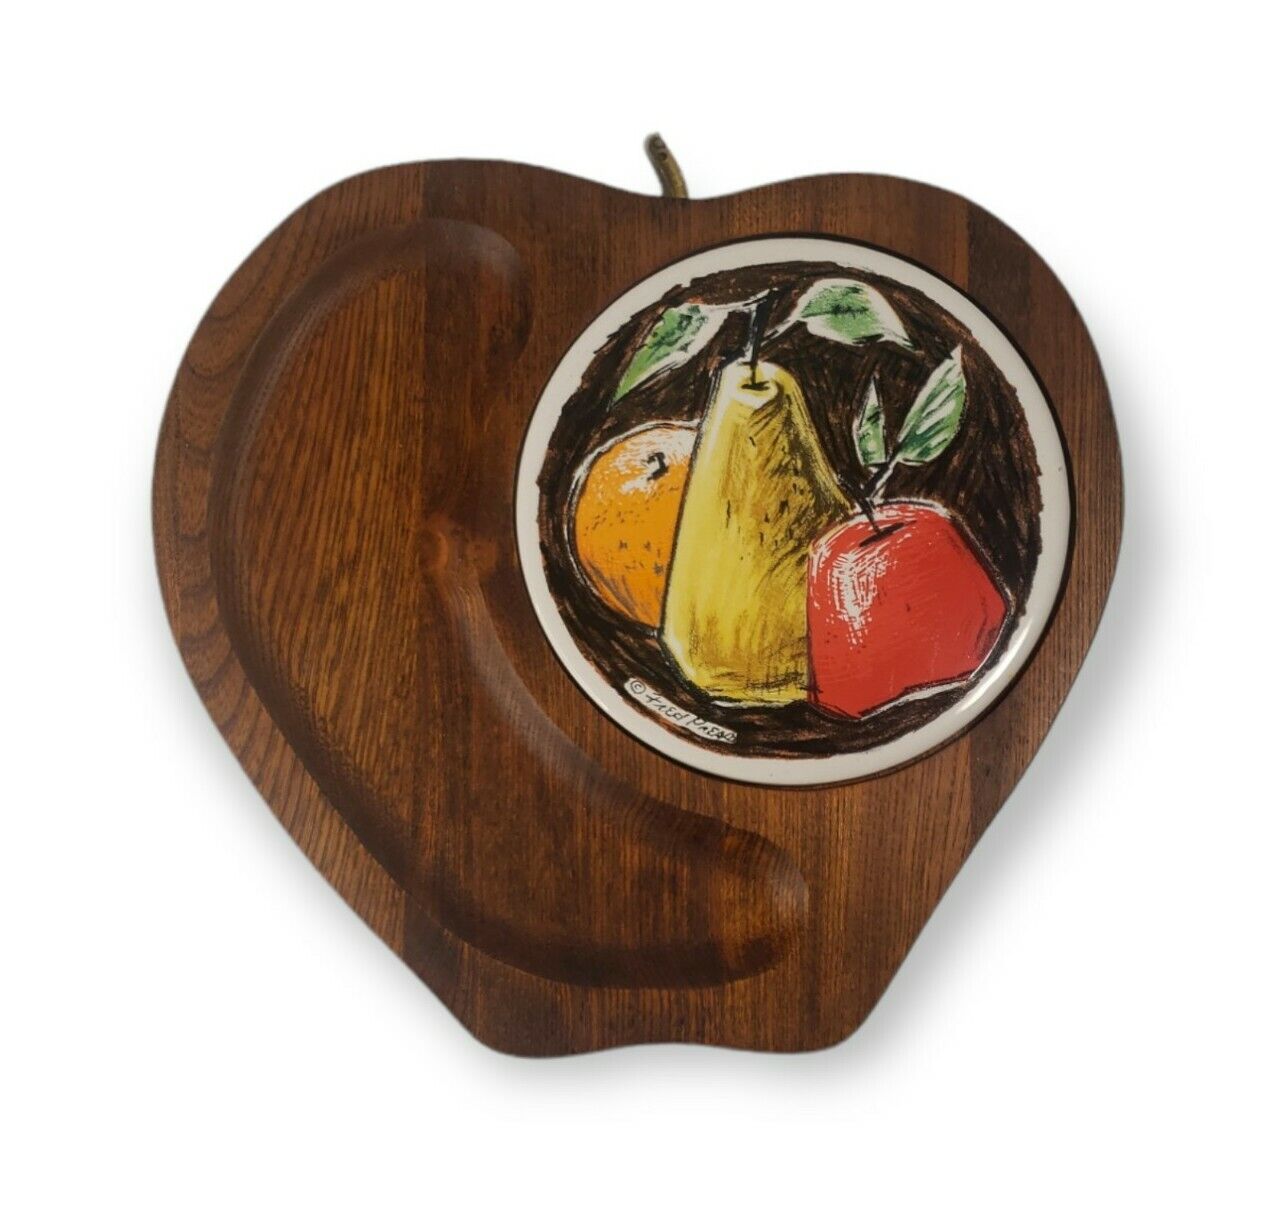 Vintage 1960s FRED PRESS Sere Wood Ceramic FRUIT Tile Cheese Tray BARWARE Apples